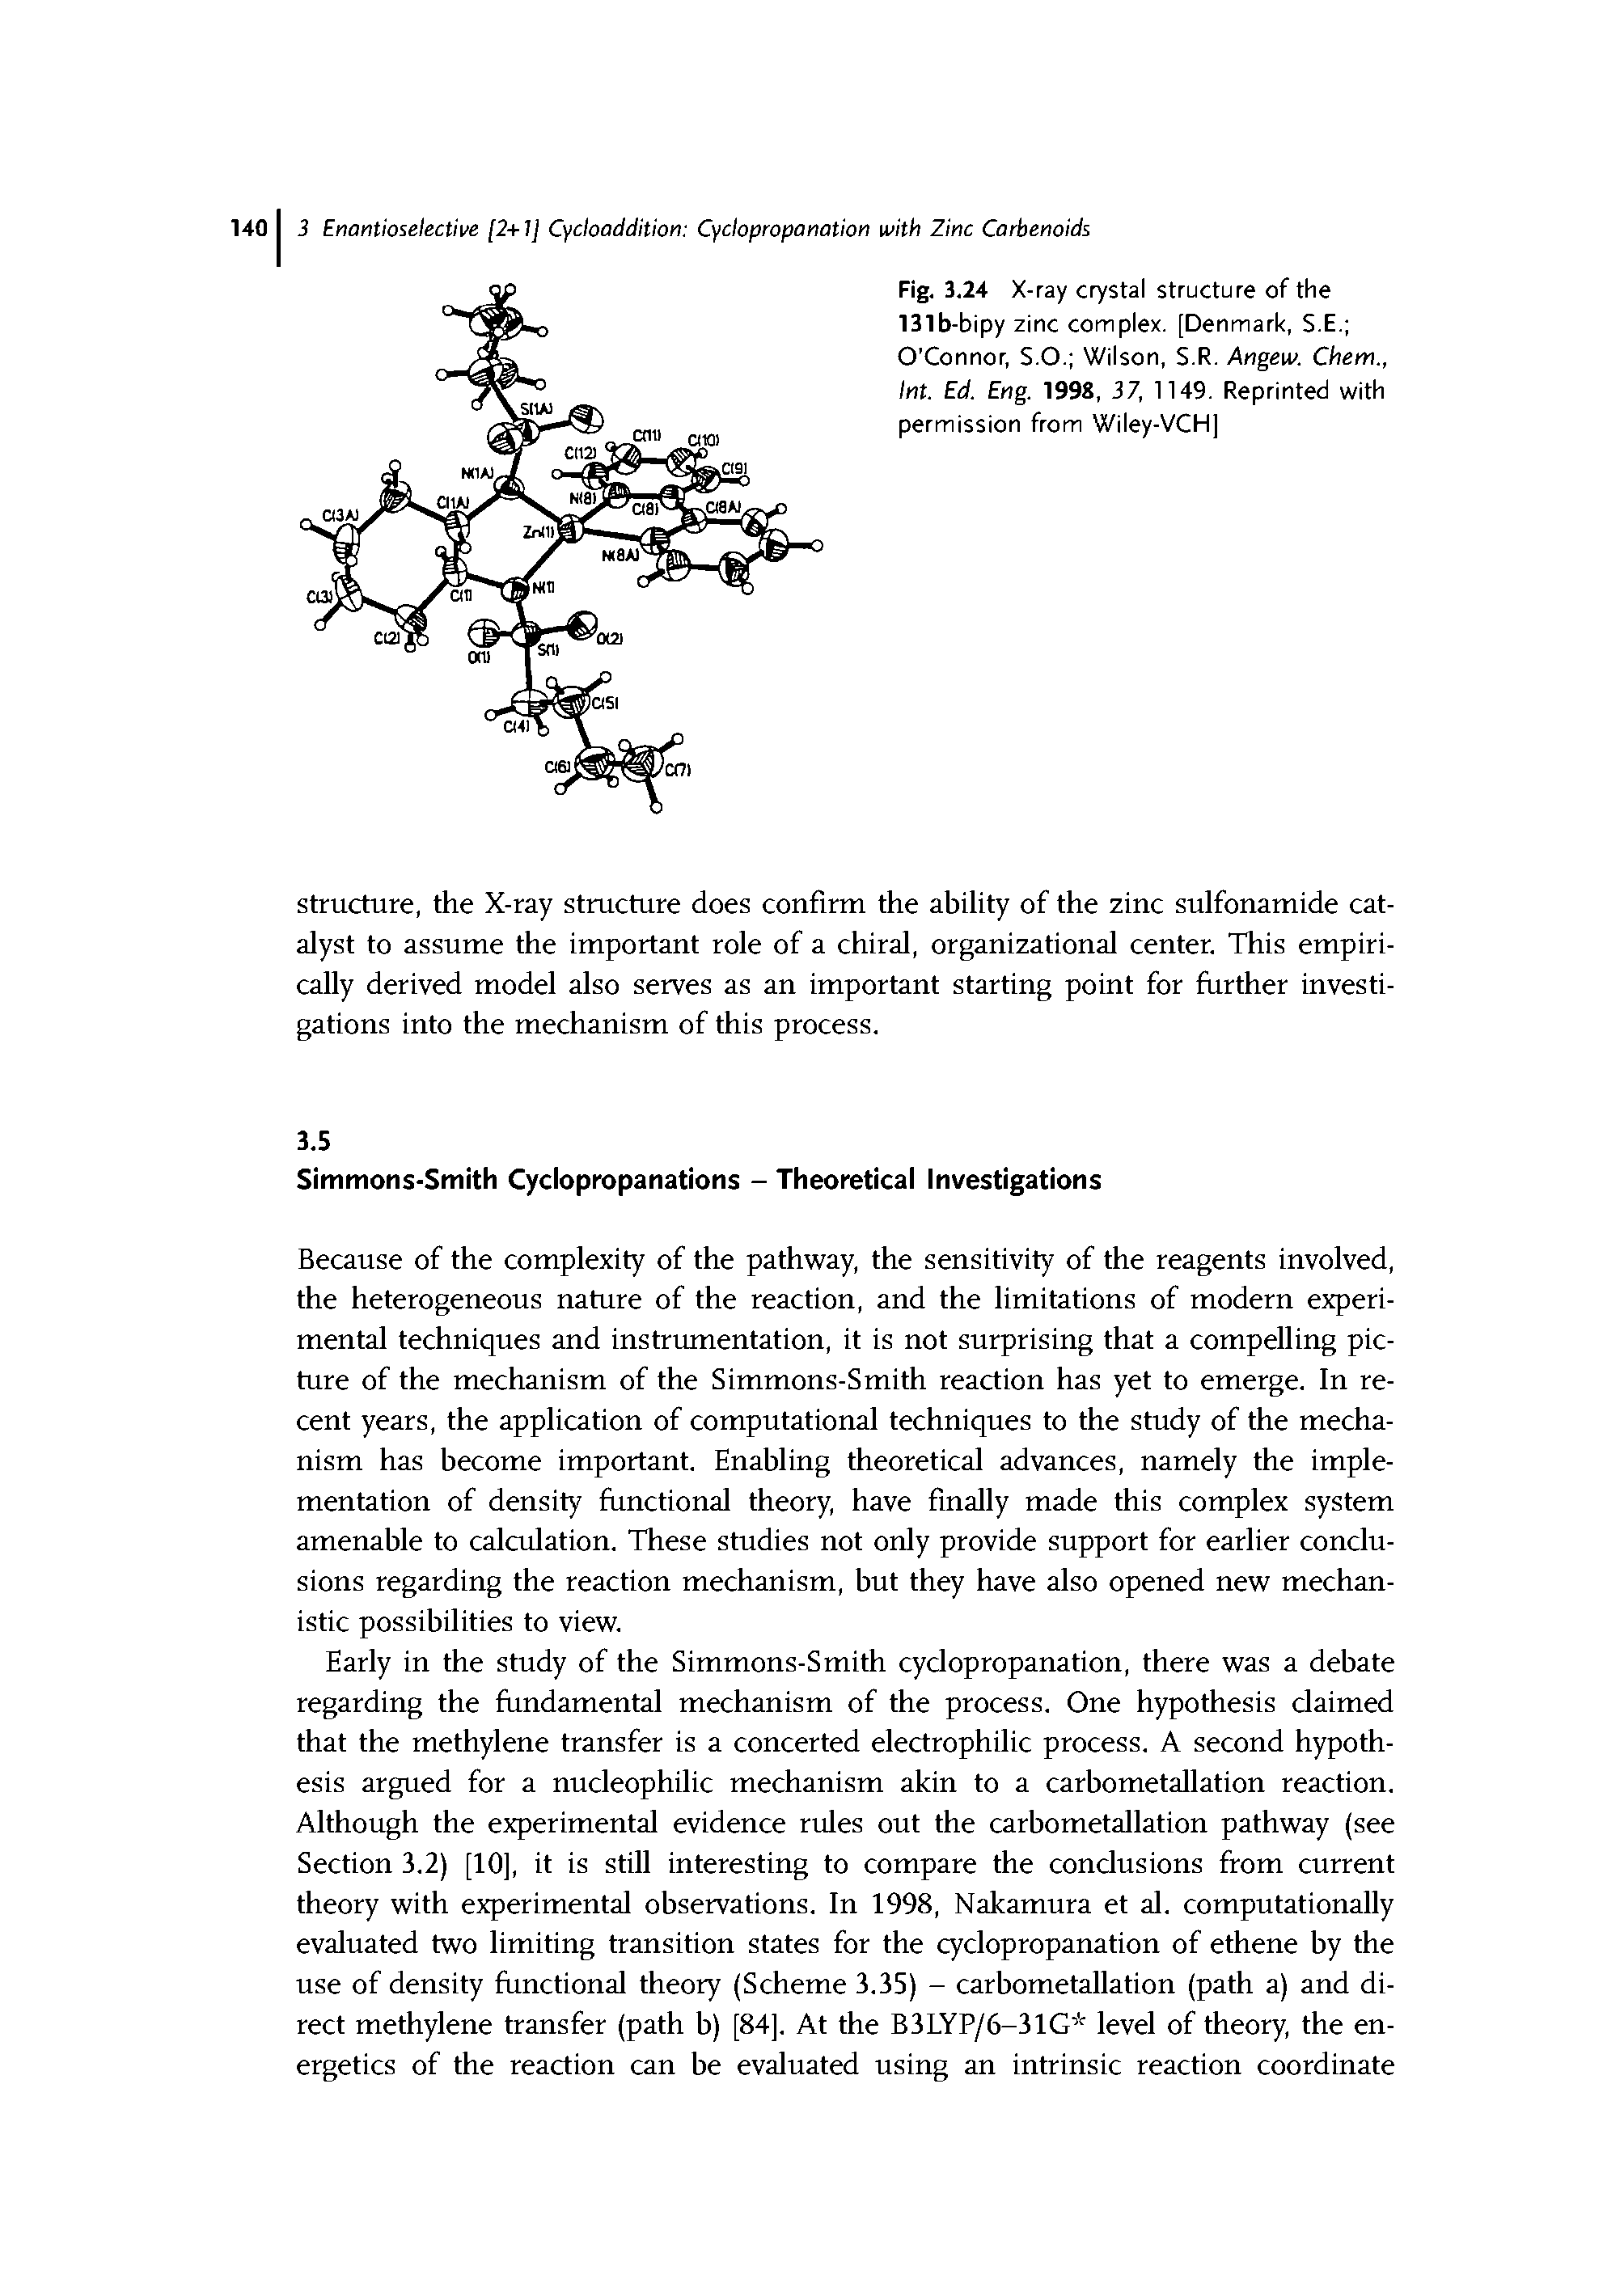 Fig. 3.24 X-ray crystal structure of the 131b-bipy zinc complex. [Denmark, S.E. O Connor, S.O. Wilson, S.R. Angew. Chem., int. Ed. Eng. 1998, 37, 1149. Reprinted with permission from Wiley-VCH ...